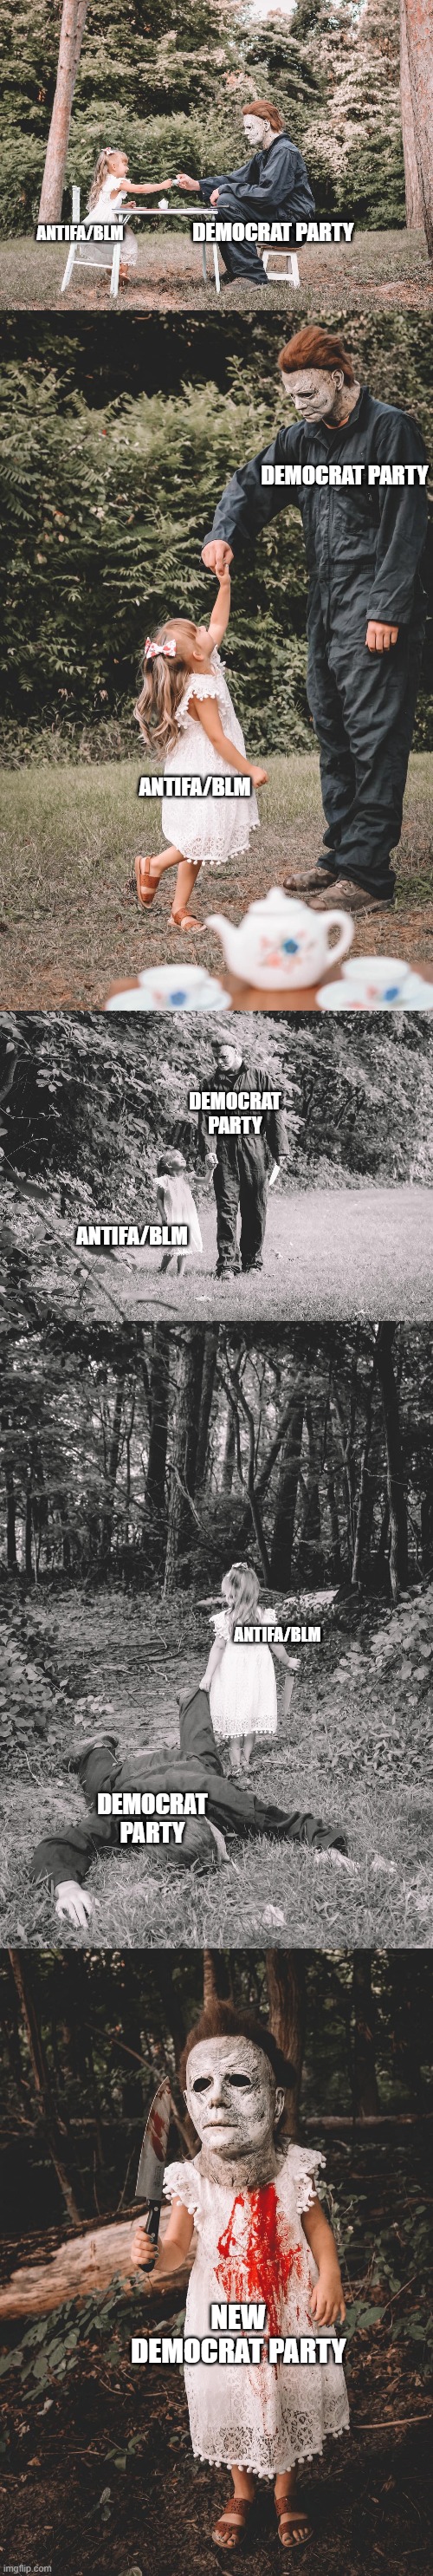 Just in time for the Halloween memes...ok  a bit early. | DEMOCRAT PARTY; ANTIFA/BLM; DEMOCRAT PARTY; ANTIFA/BLM; DEMOCRAT PARTY; ANTIFA/BLM; ANTIFA/BLM; DEMOCRAT PARTY; NEW DEMOCRAT PARTY | image tagged in halloween,antifa,blm,politics | made w/ Imgflip meme maker